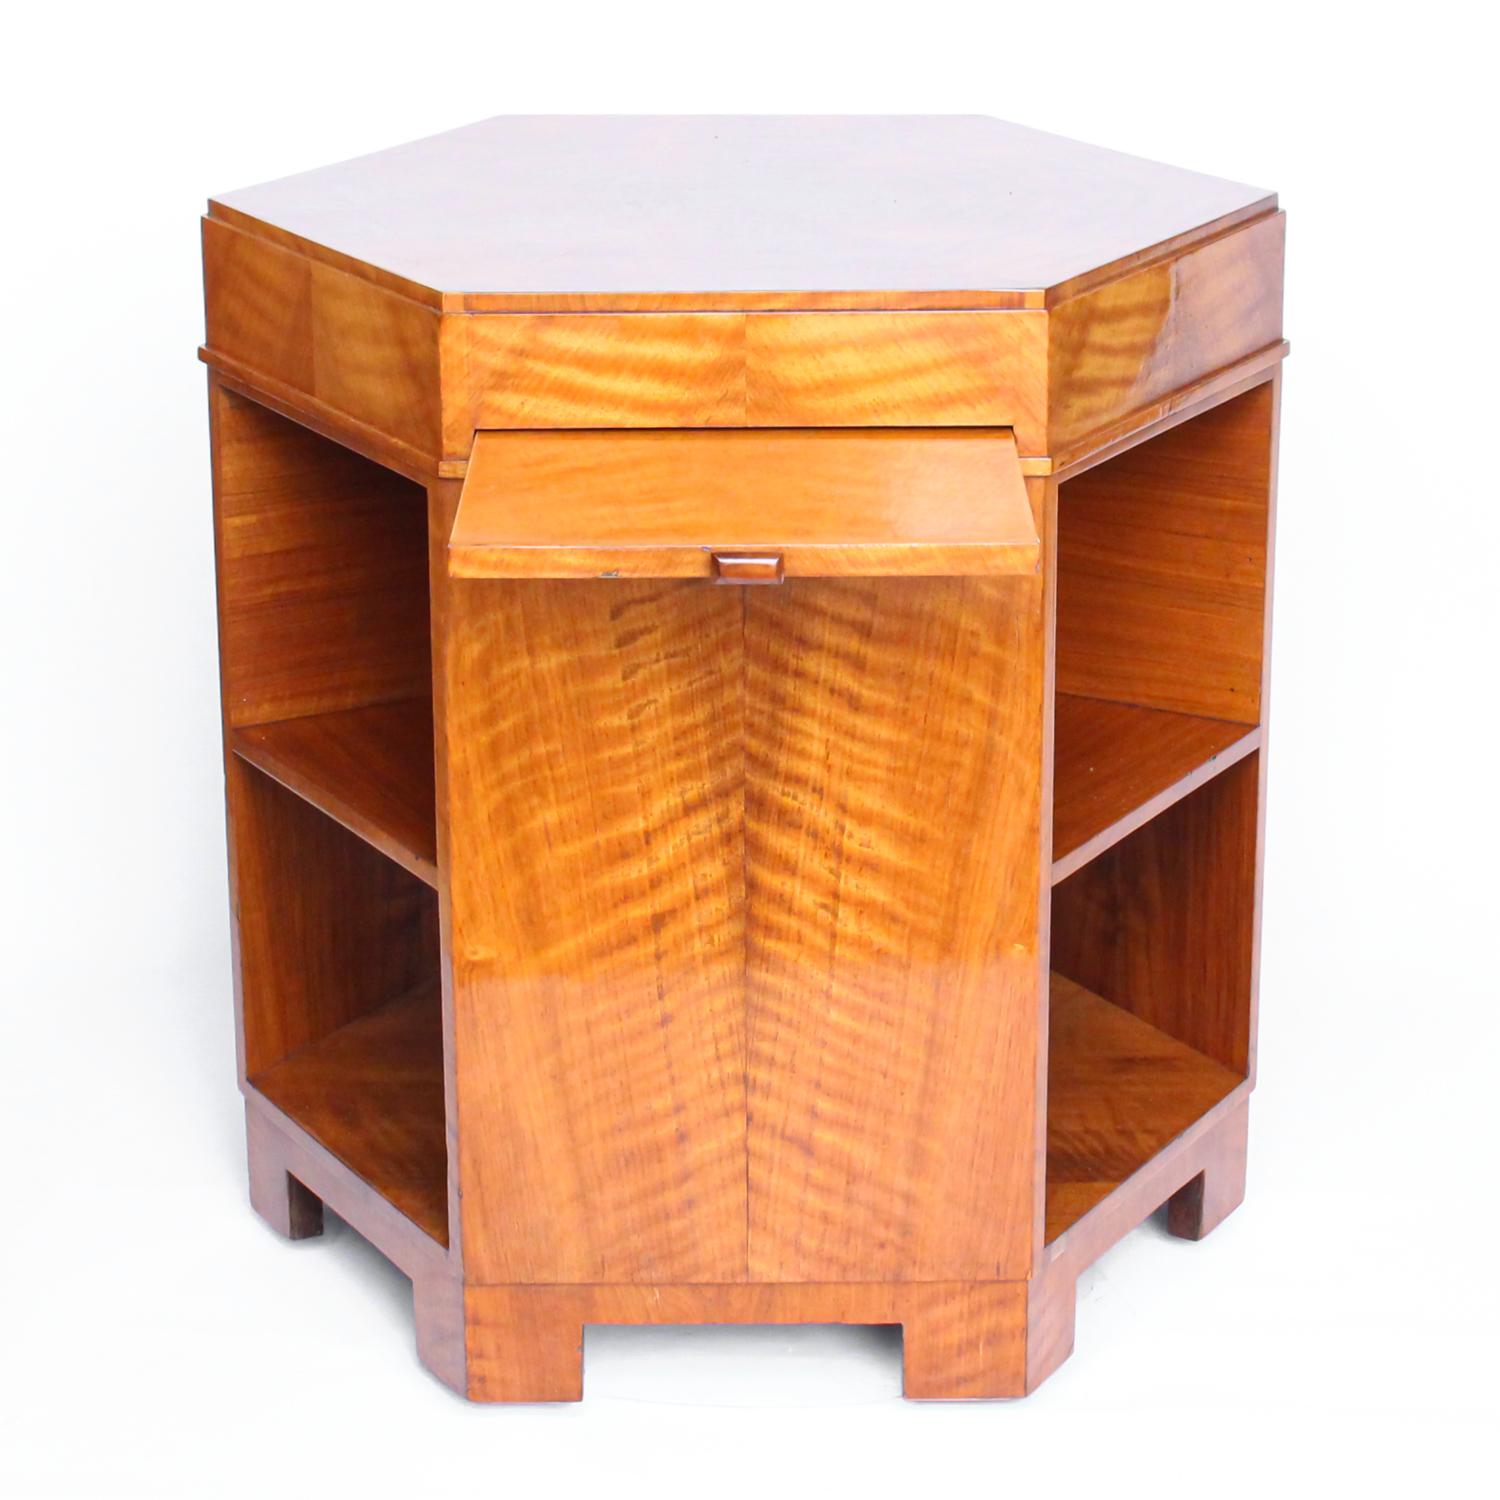 An Art Deco, satin wood veneer hexagonal library table with three integral sliding trays, attributed to Heal's. 

Origin: England

Date: circa 1935
 